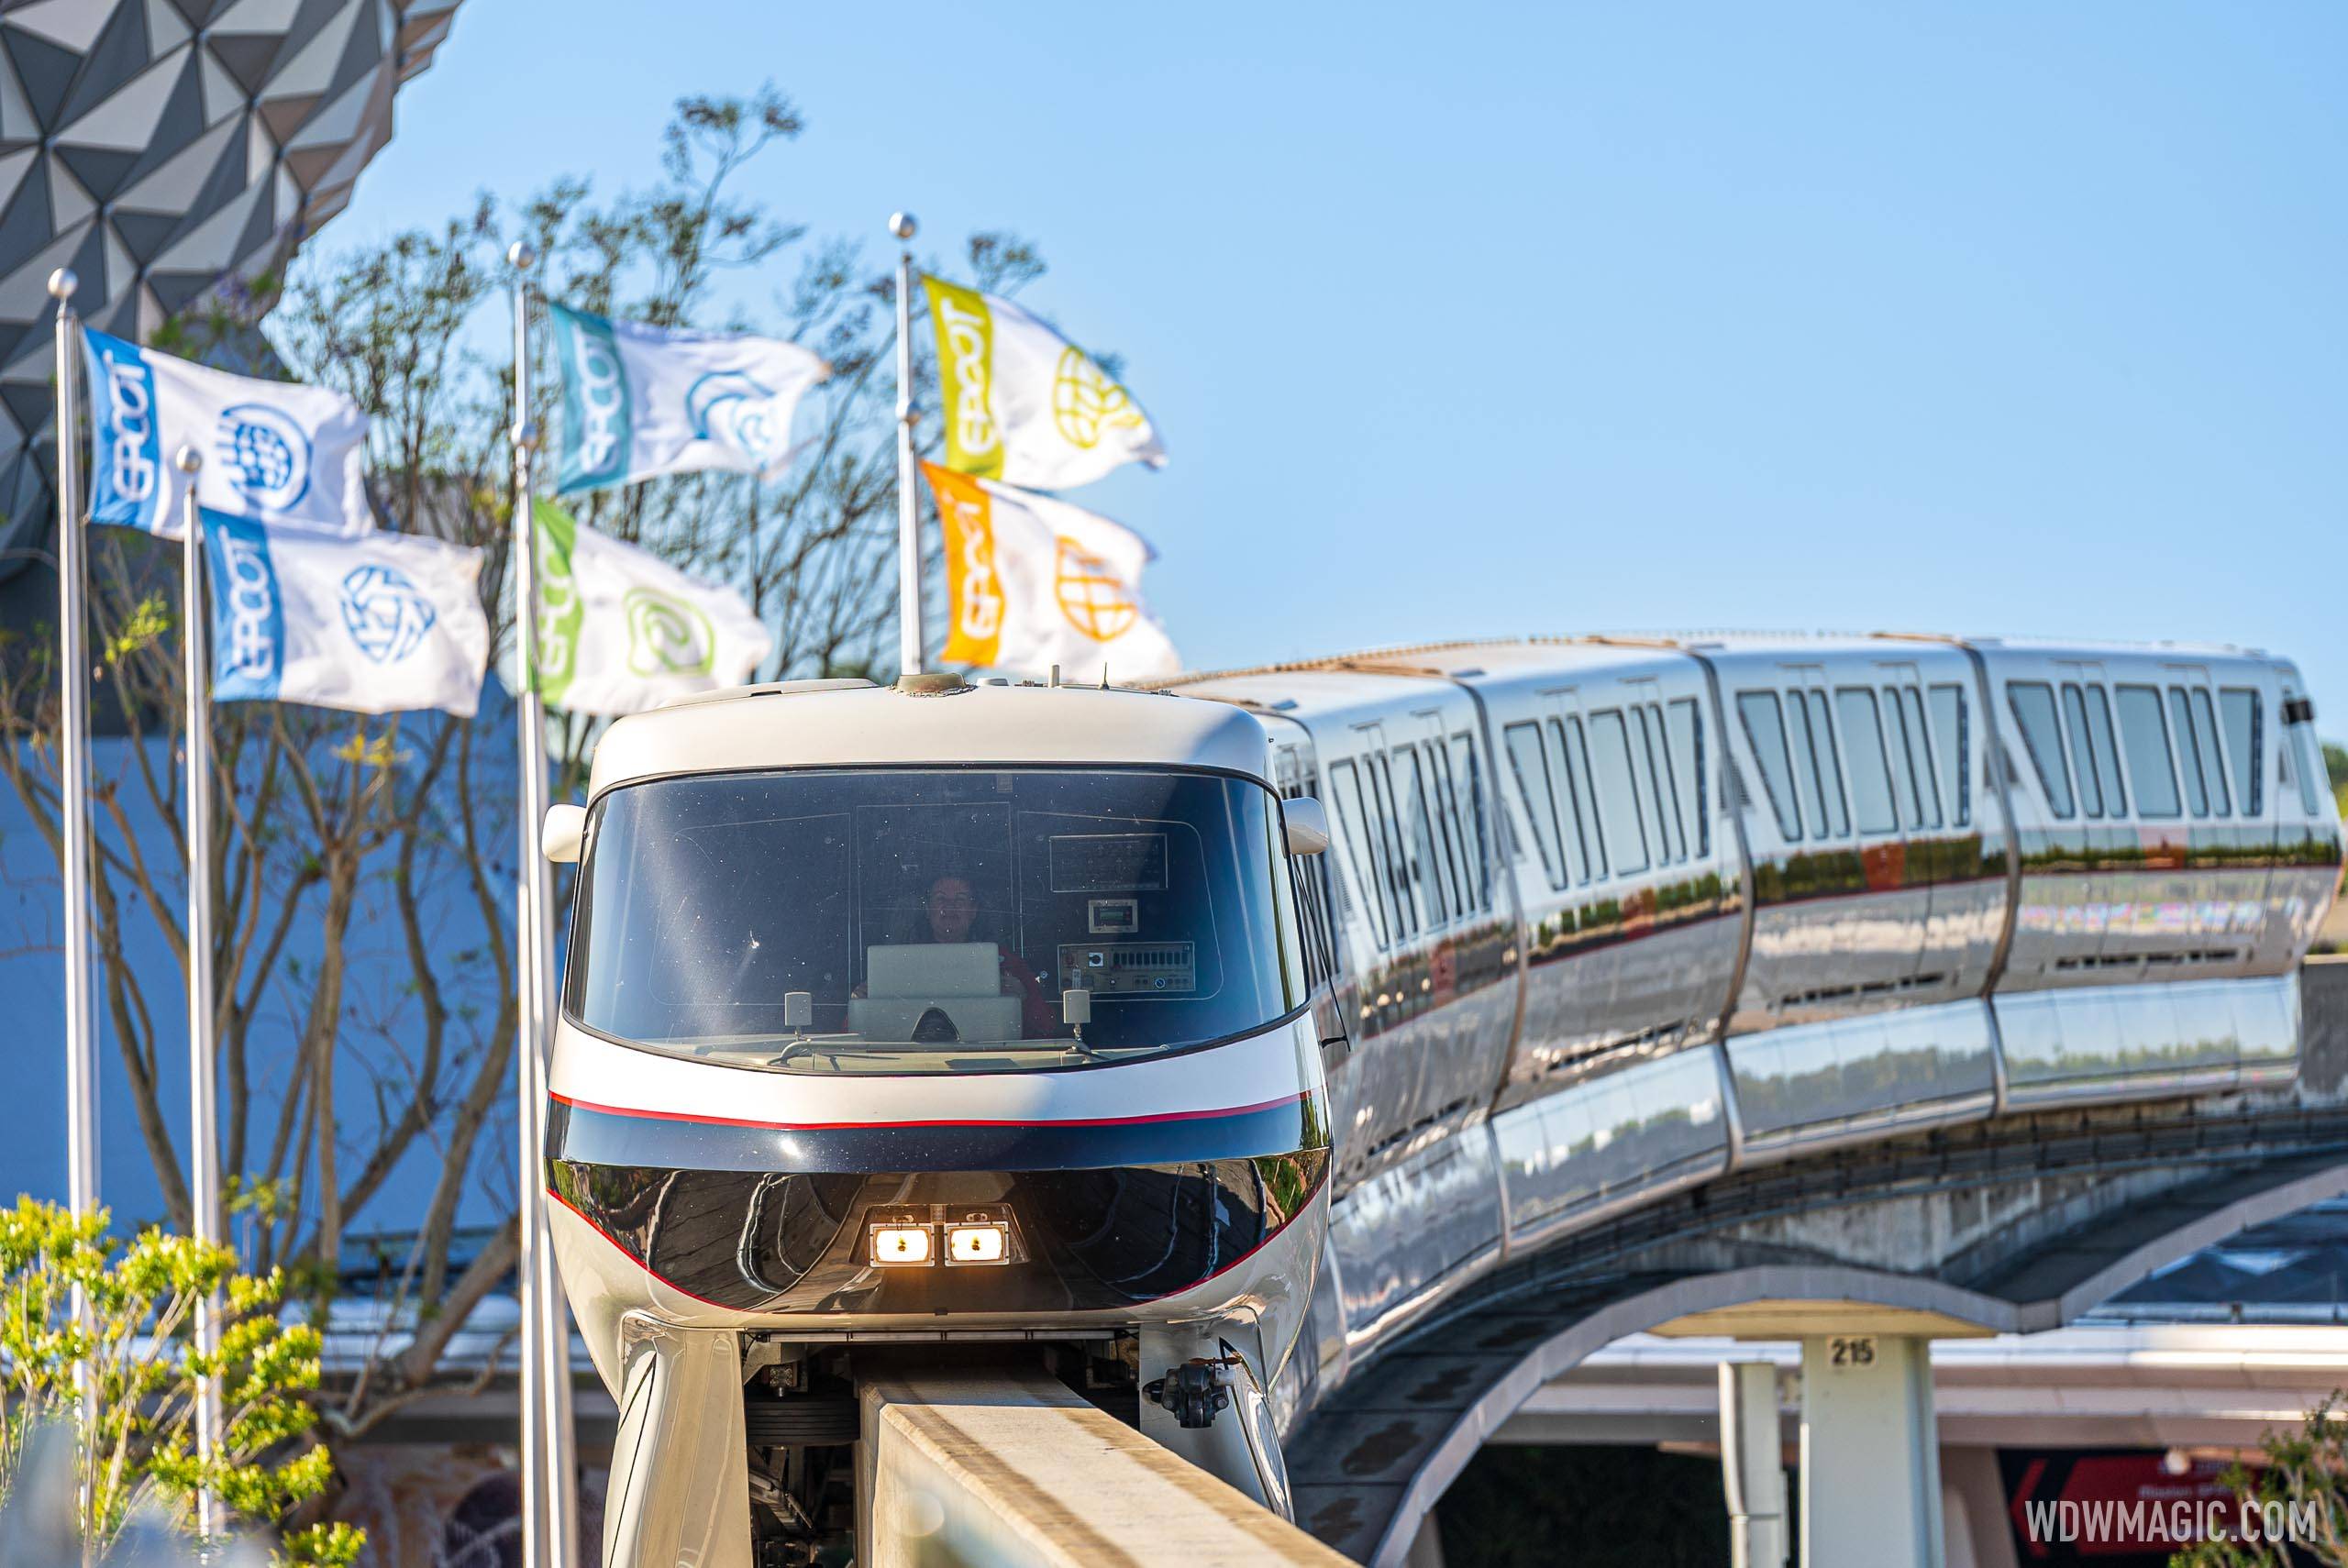 Daytime monorail closures in effect through to March